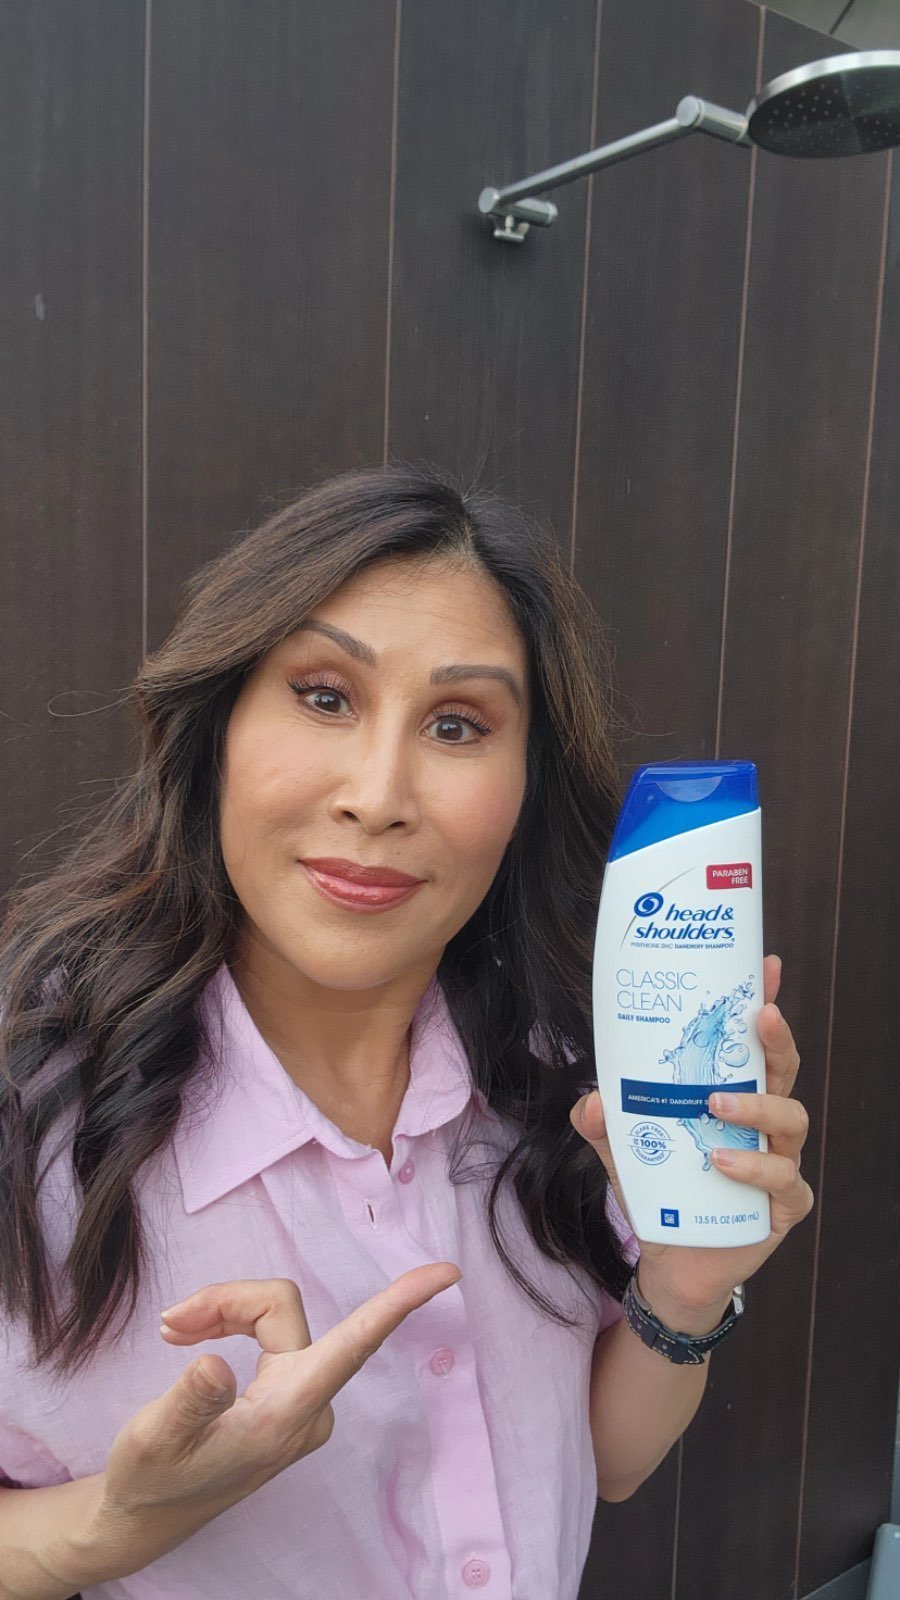 offer stavelse Smitsom HEAD & SHOULDERS AS FACE WASH? — Dr. Jessica Wu